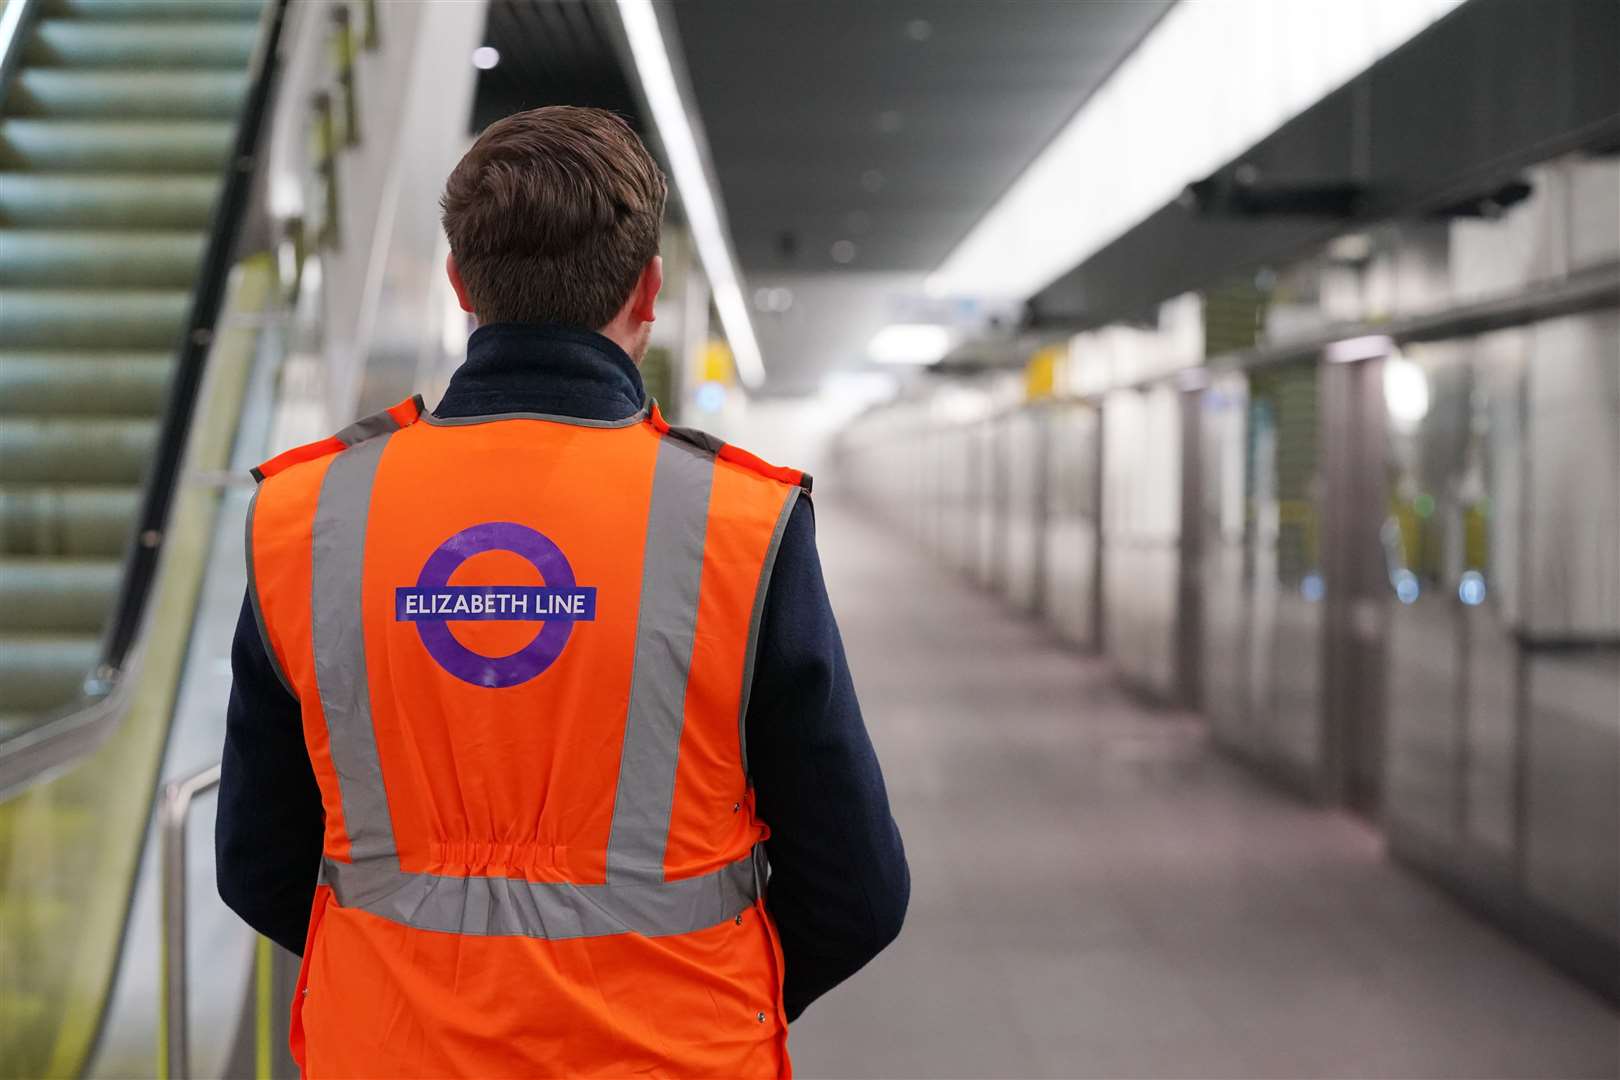 A Transport for London employee stands on the platform at the Canary Wharf Elizabeth line station (Jonathan Brady/PA)